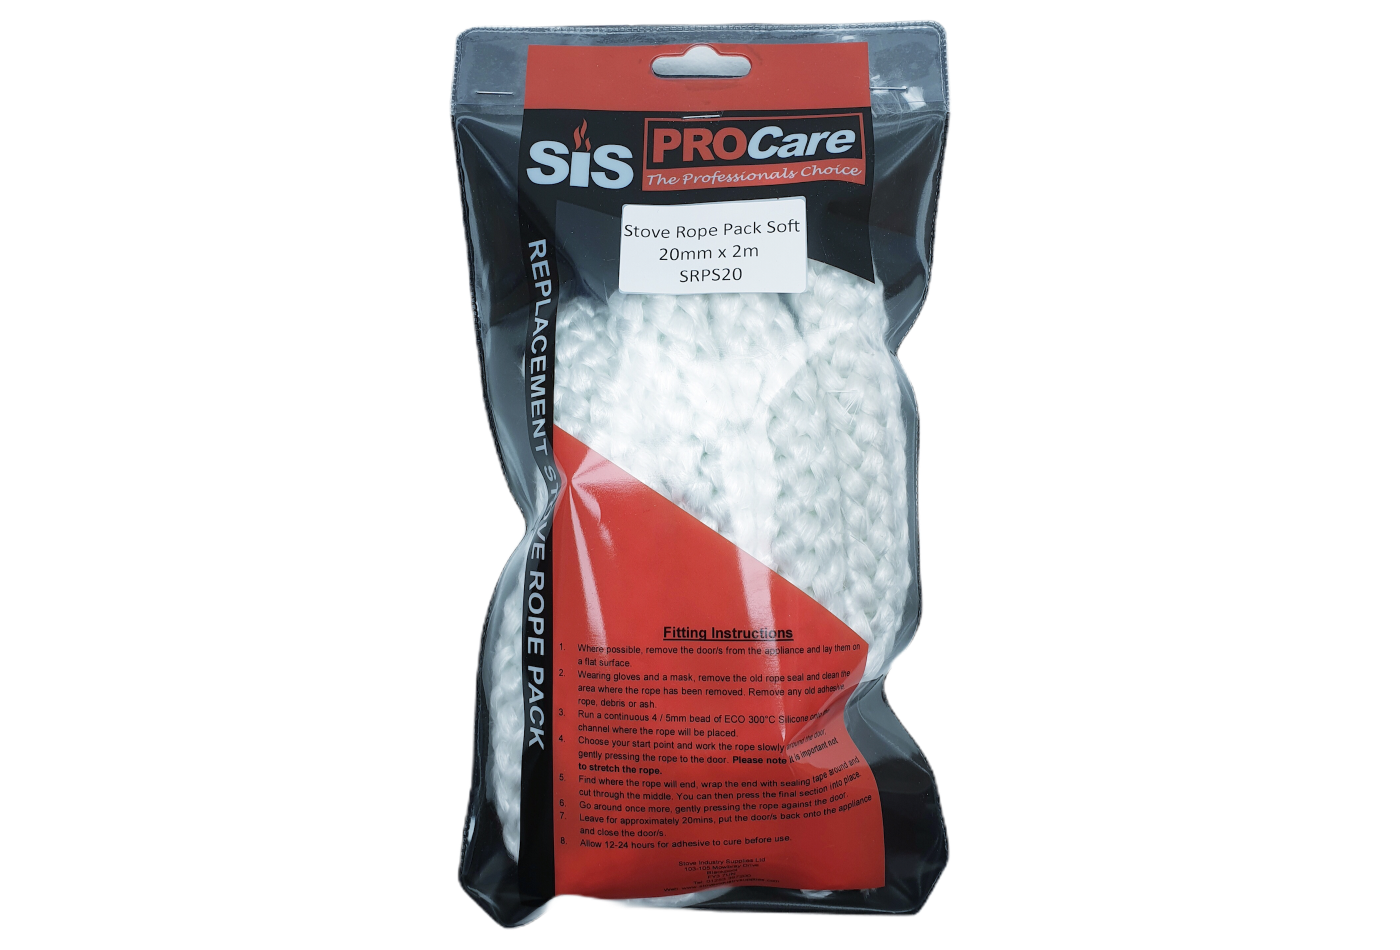 SiS Procare White 20 milimetre x 2 metre Soft Stove Rope Pack - product code SRPS20